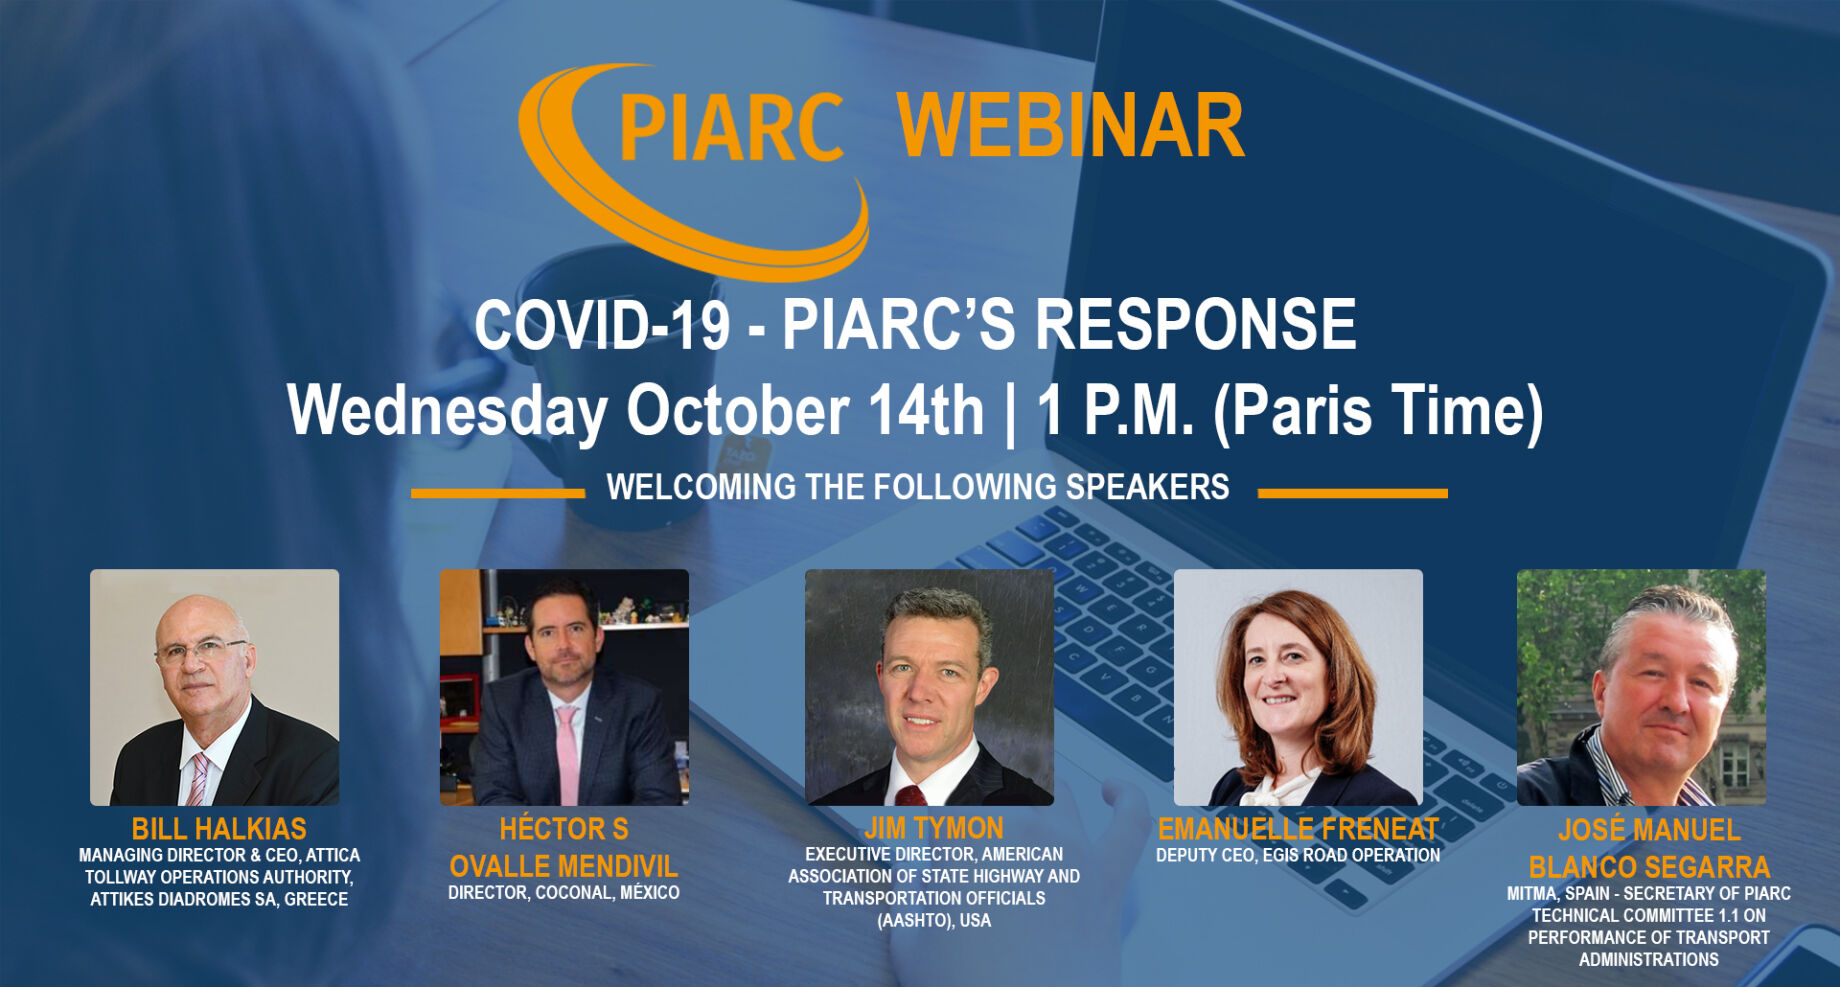 Are road authorities ready to face the new wave of the COVID-19 pandemic? Find out in our next webinar on 14 October!